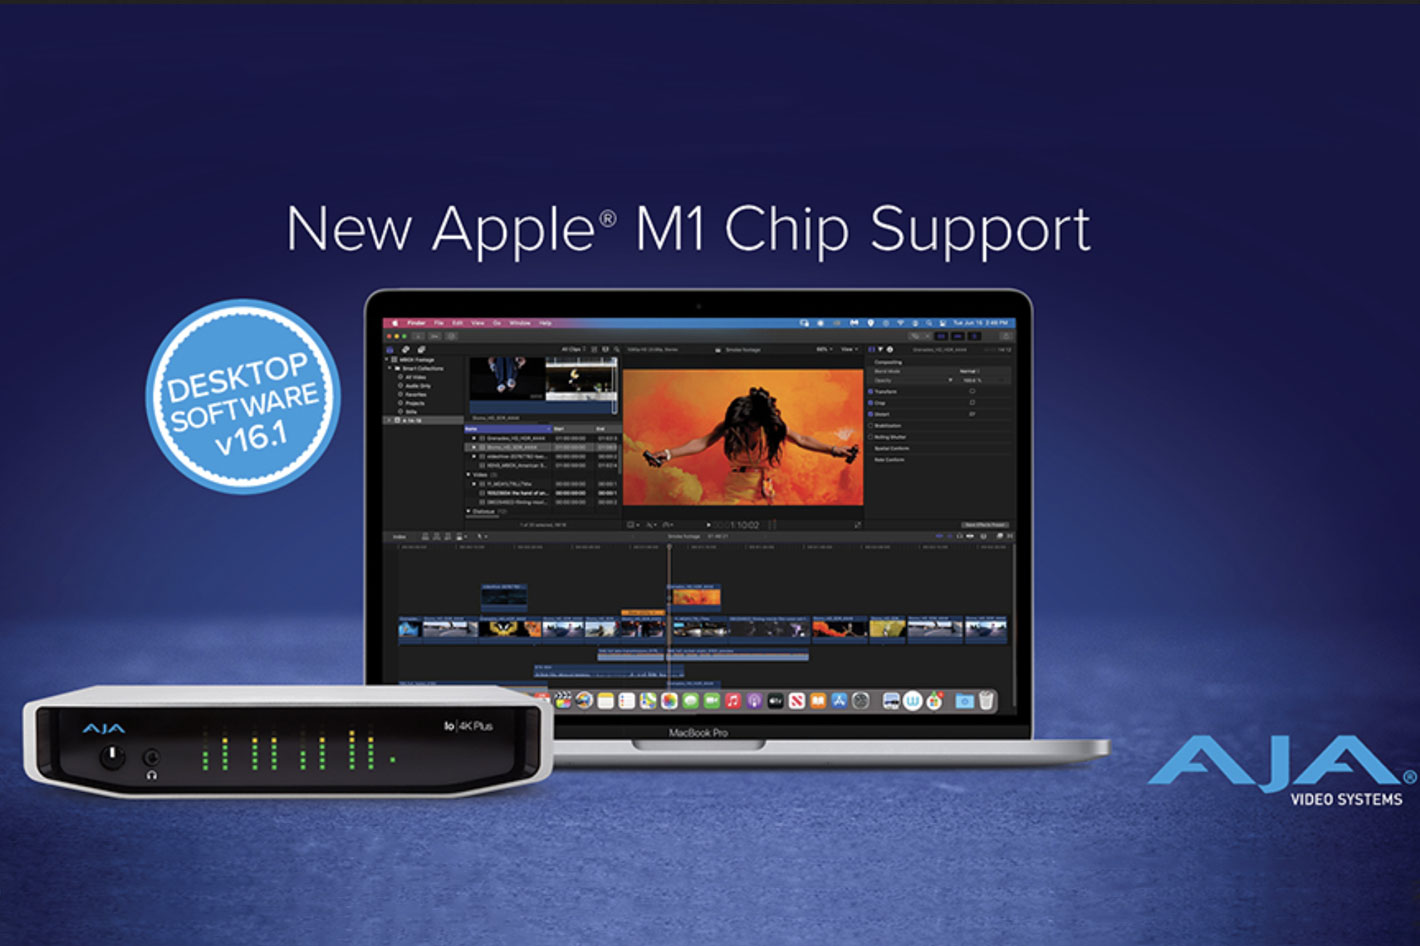 AJA Video Systems software with native Apple M1 support